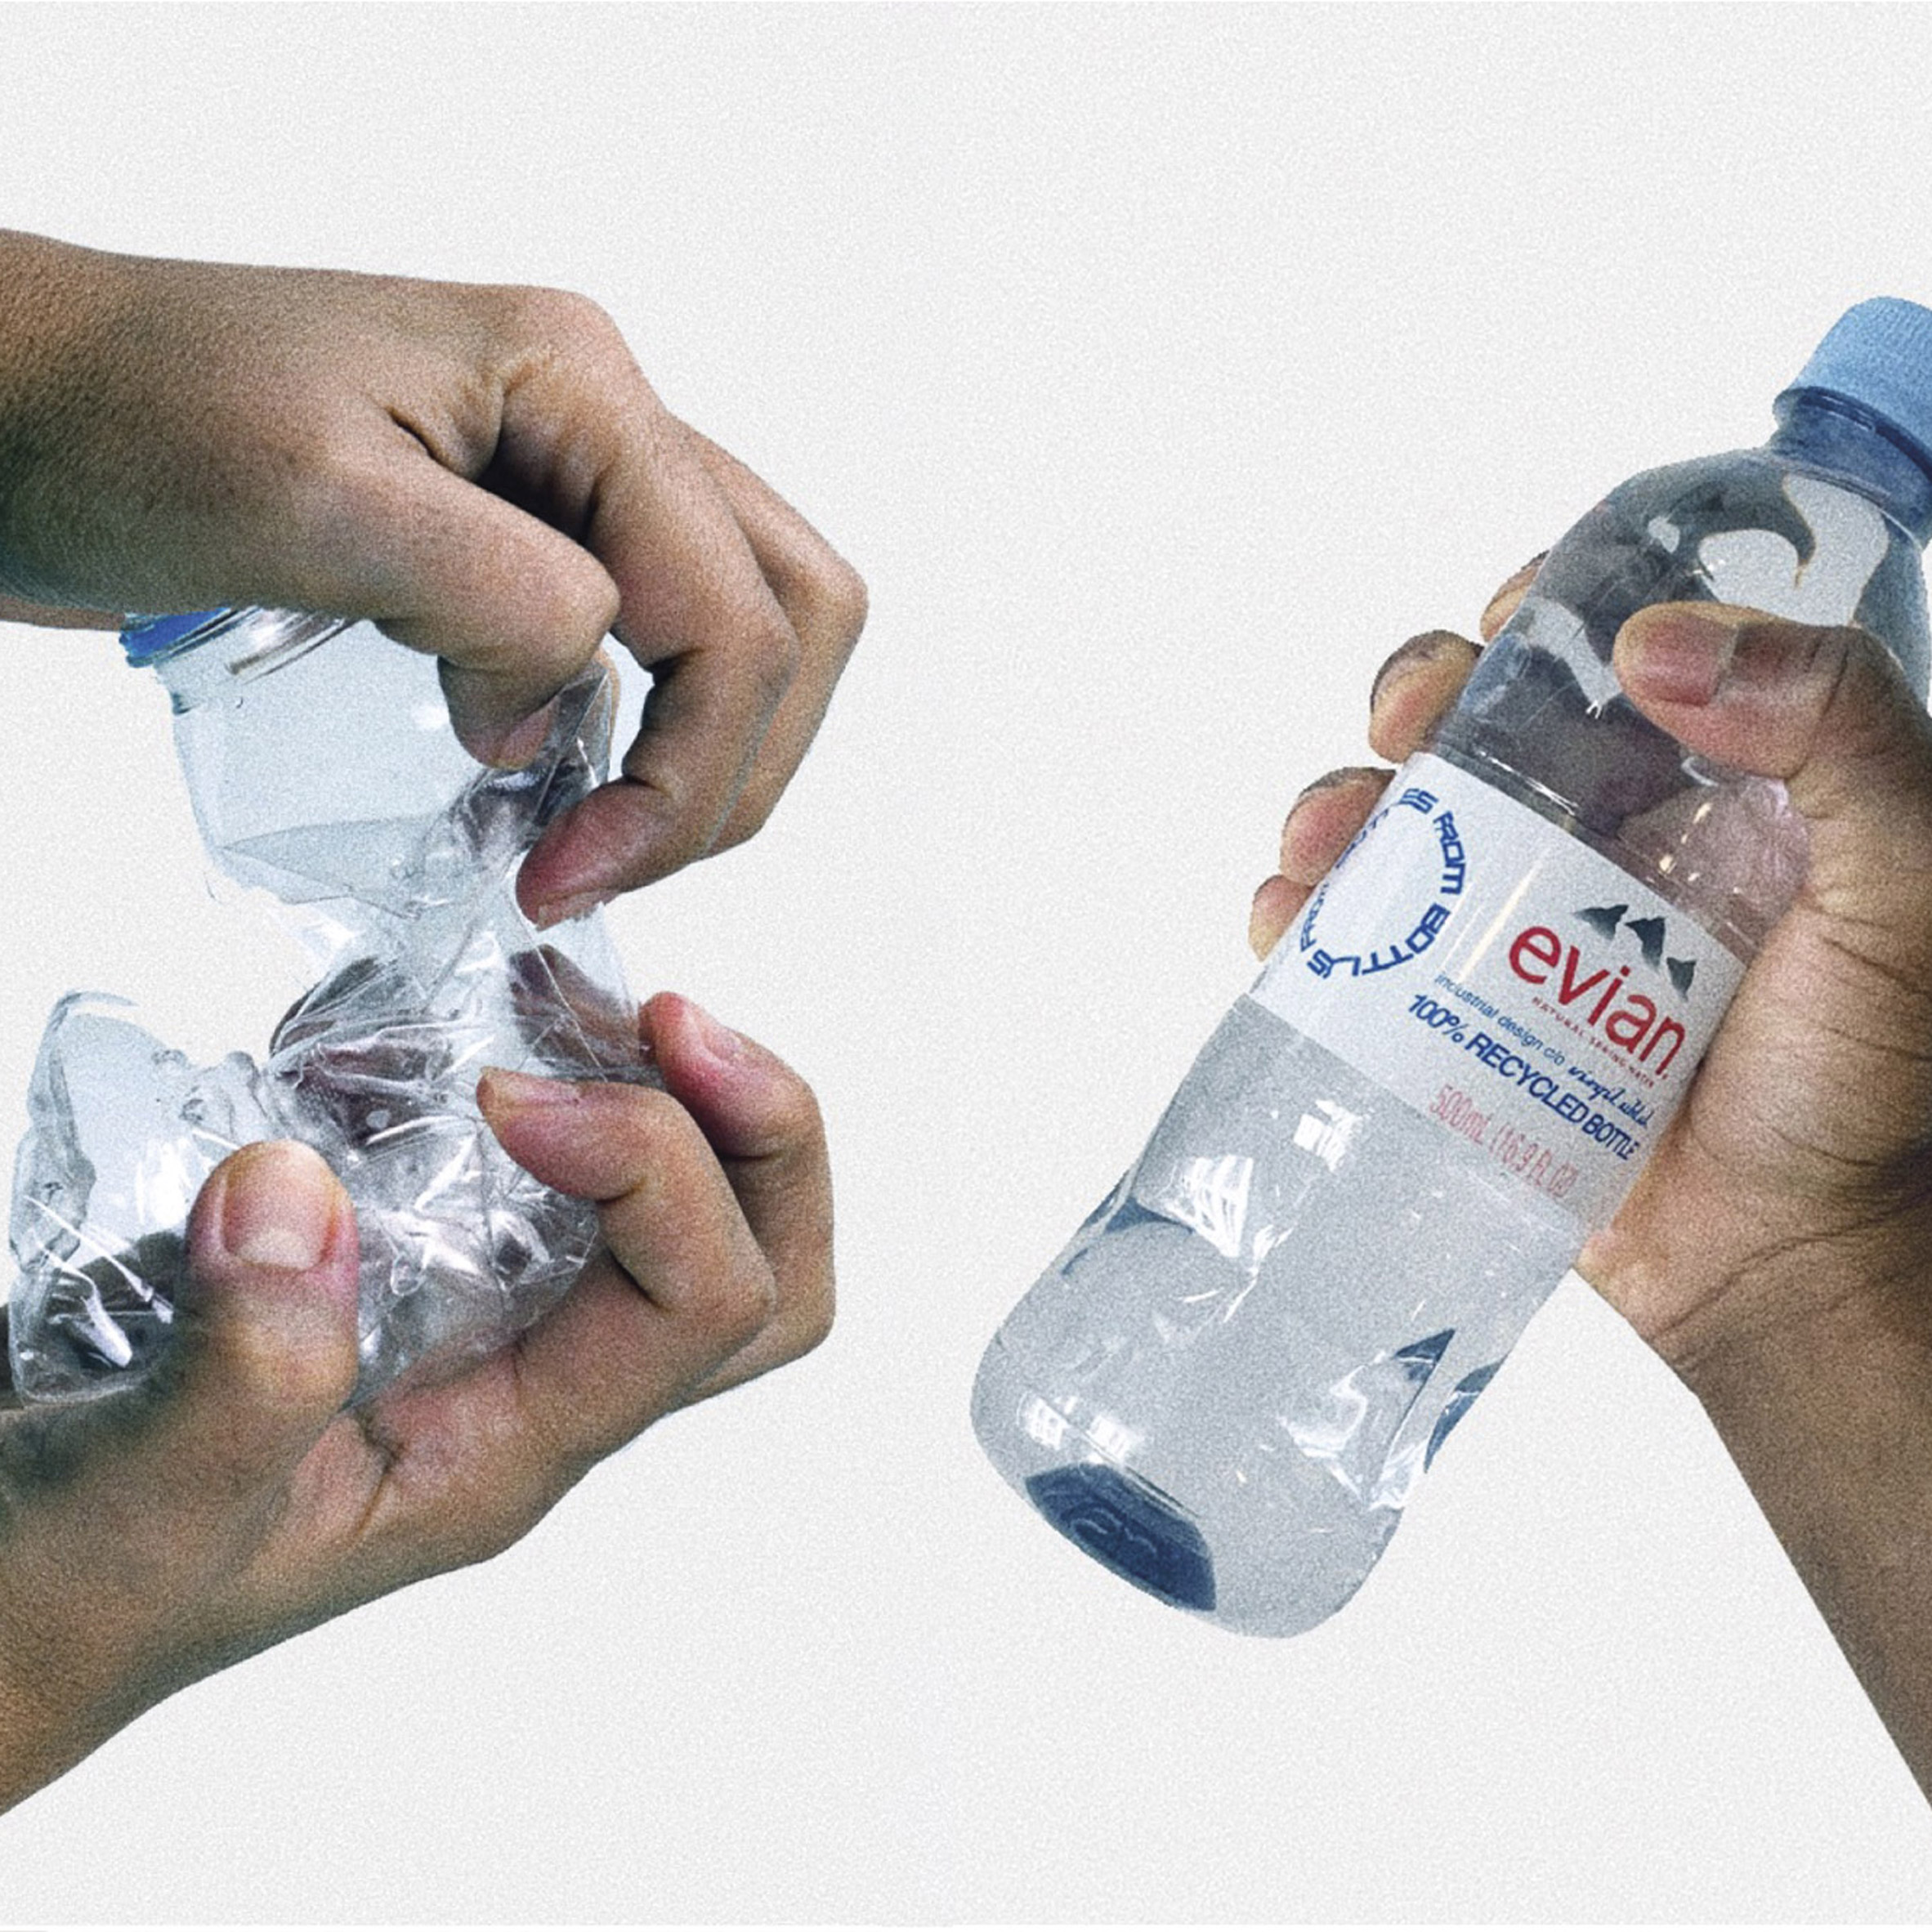 Manifesto recycled plastic bottle by Virgil Abloh for Evian